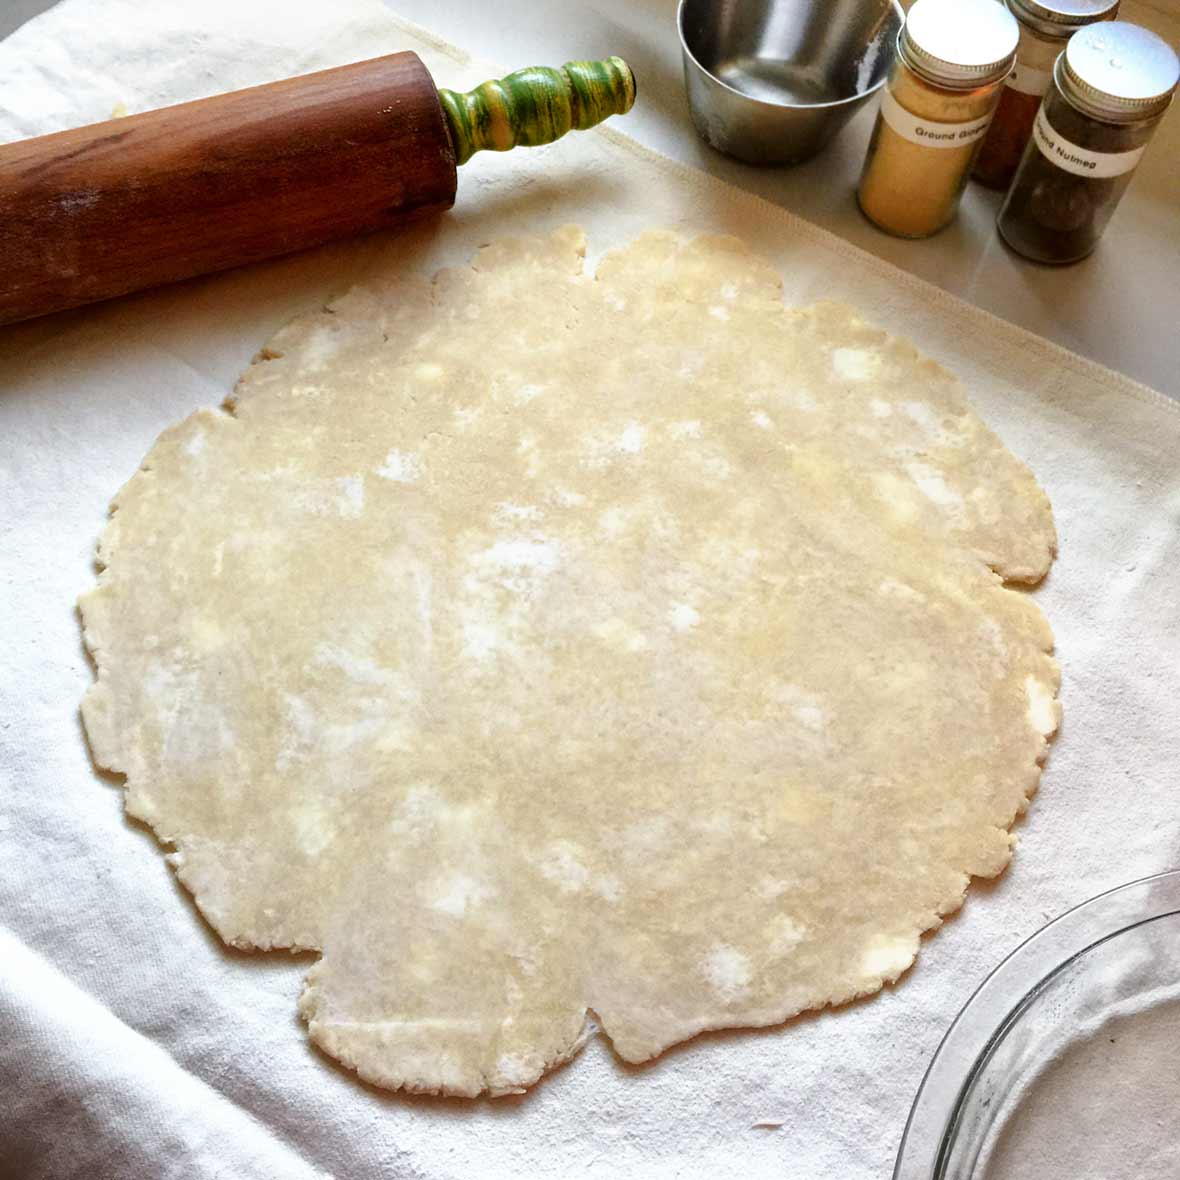 An uncooked pie crust rolled out on a floured surface with a rolling pin alongside.